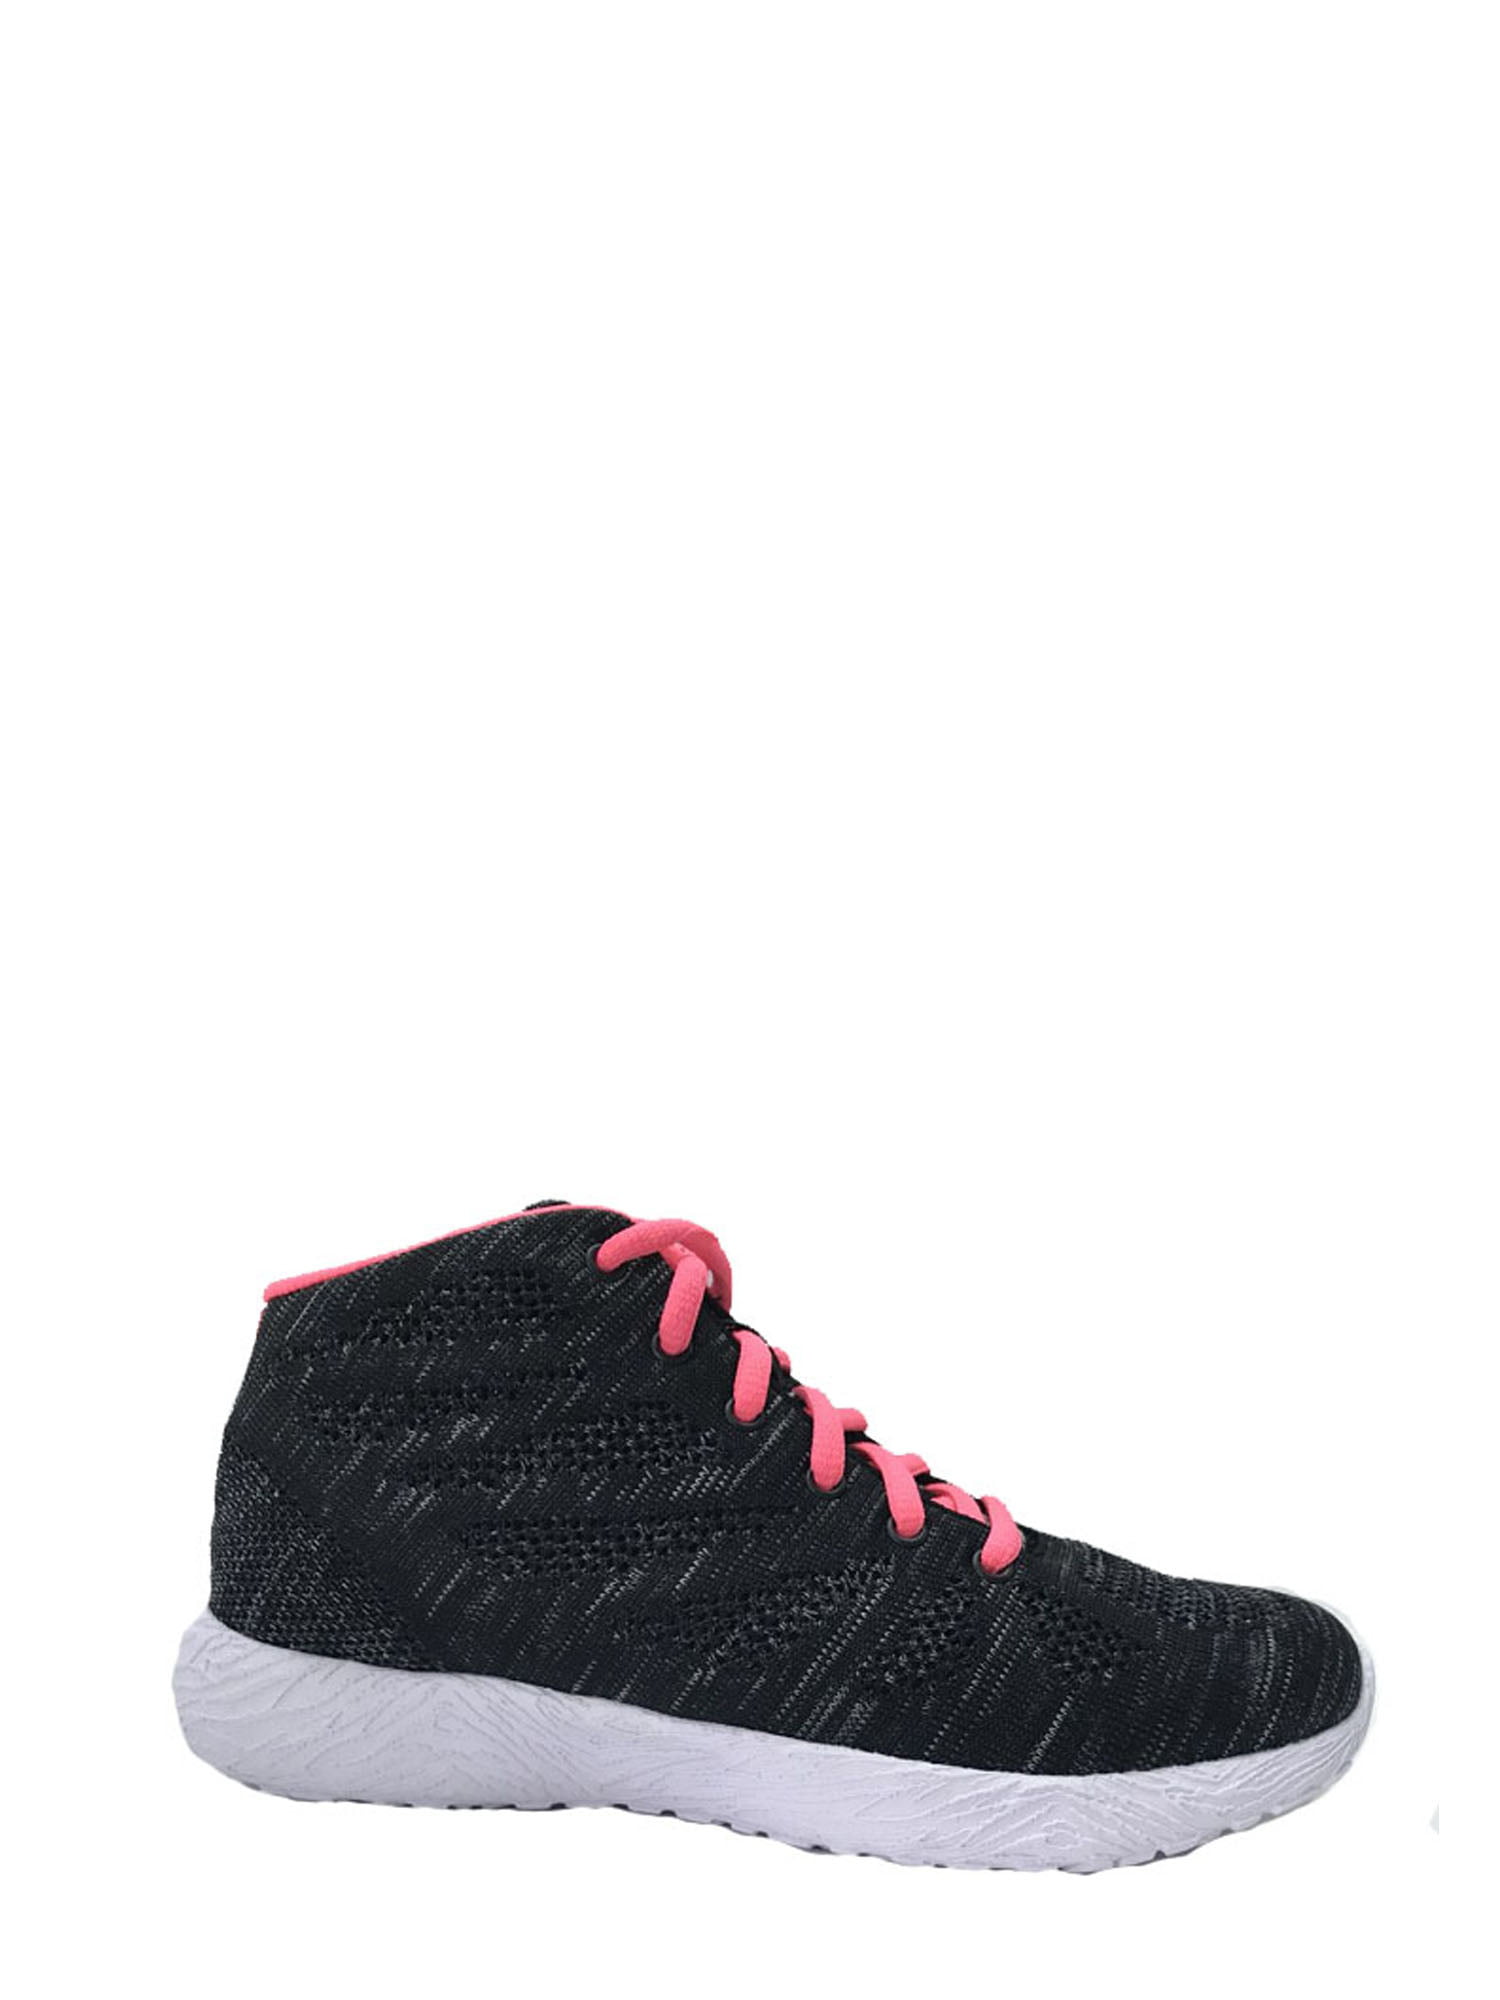 Works Women's High Top Athletic Shoe 